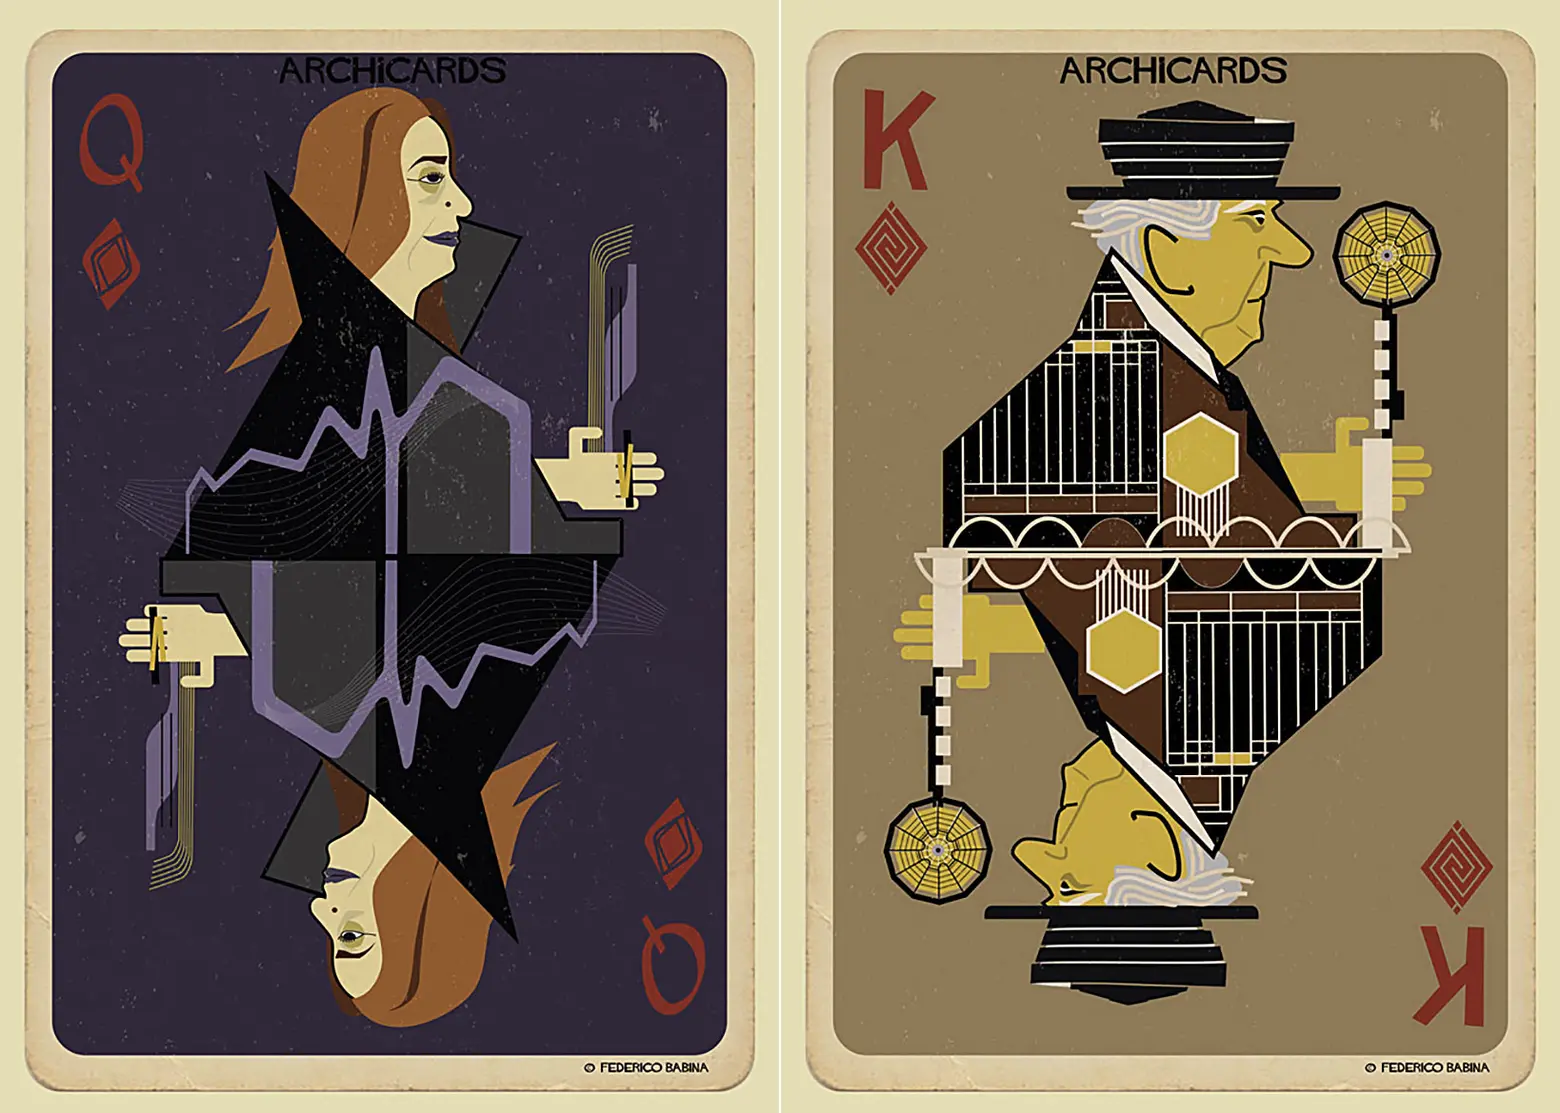 Quirky Playing Cards Are Designed With History’s Most Iconic Architects